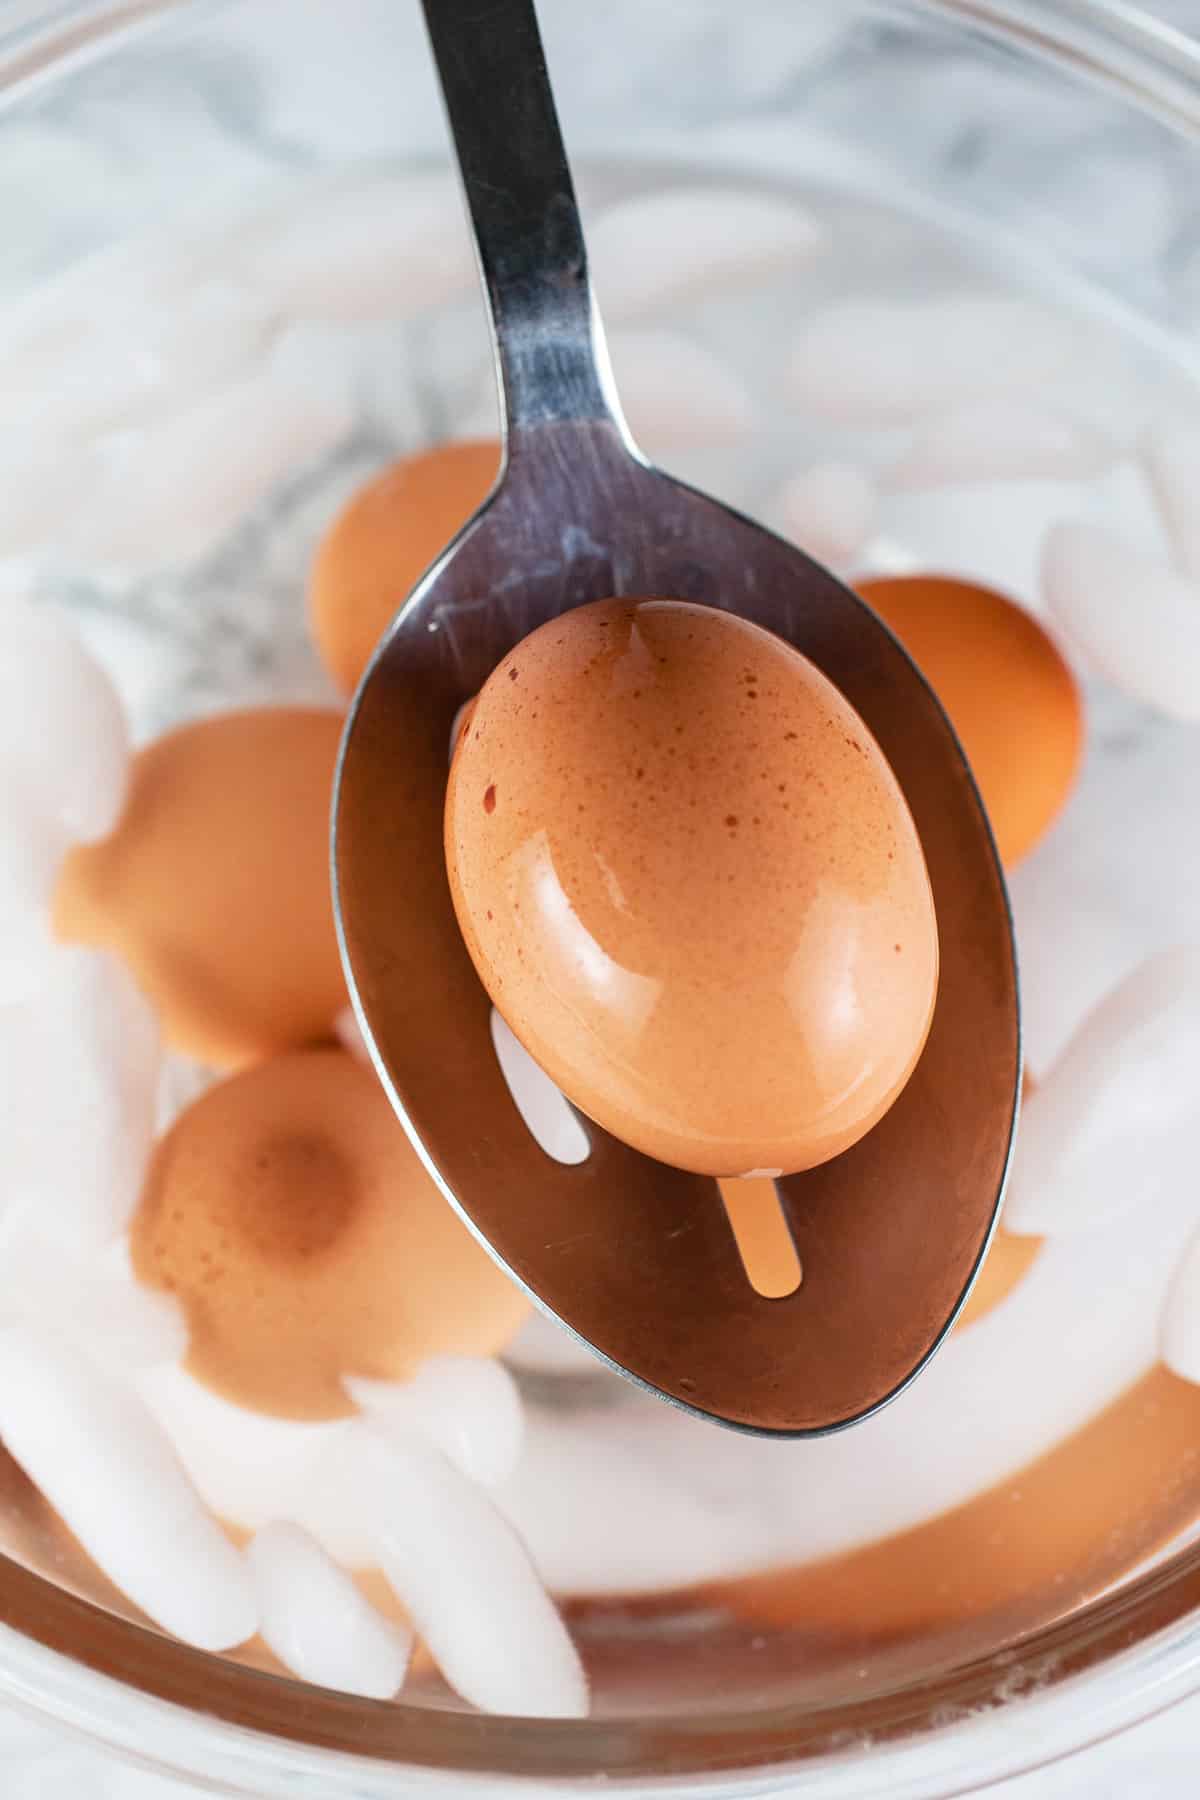 Hard boiled egg on metal slotted spoon lifted from ice bath.